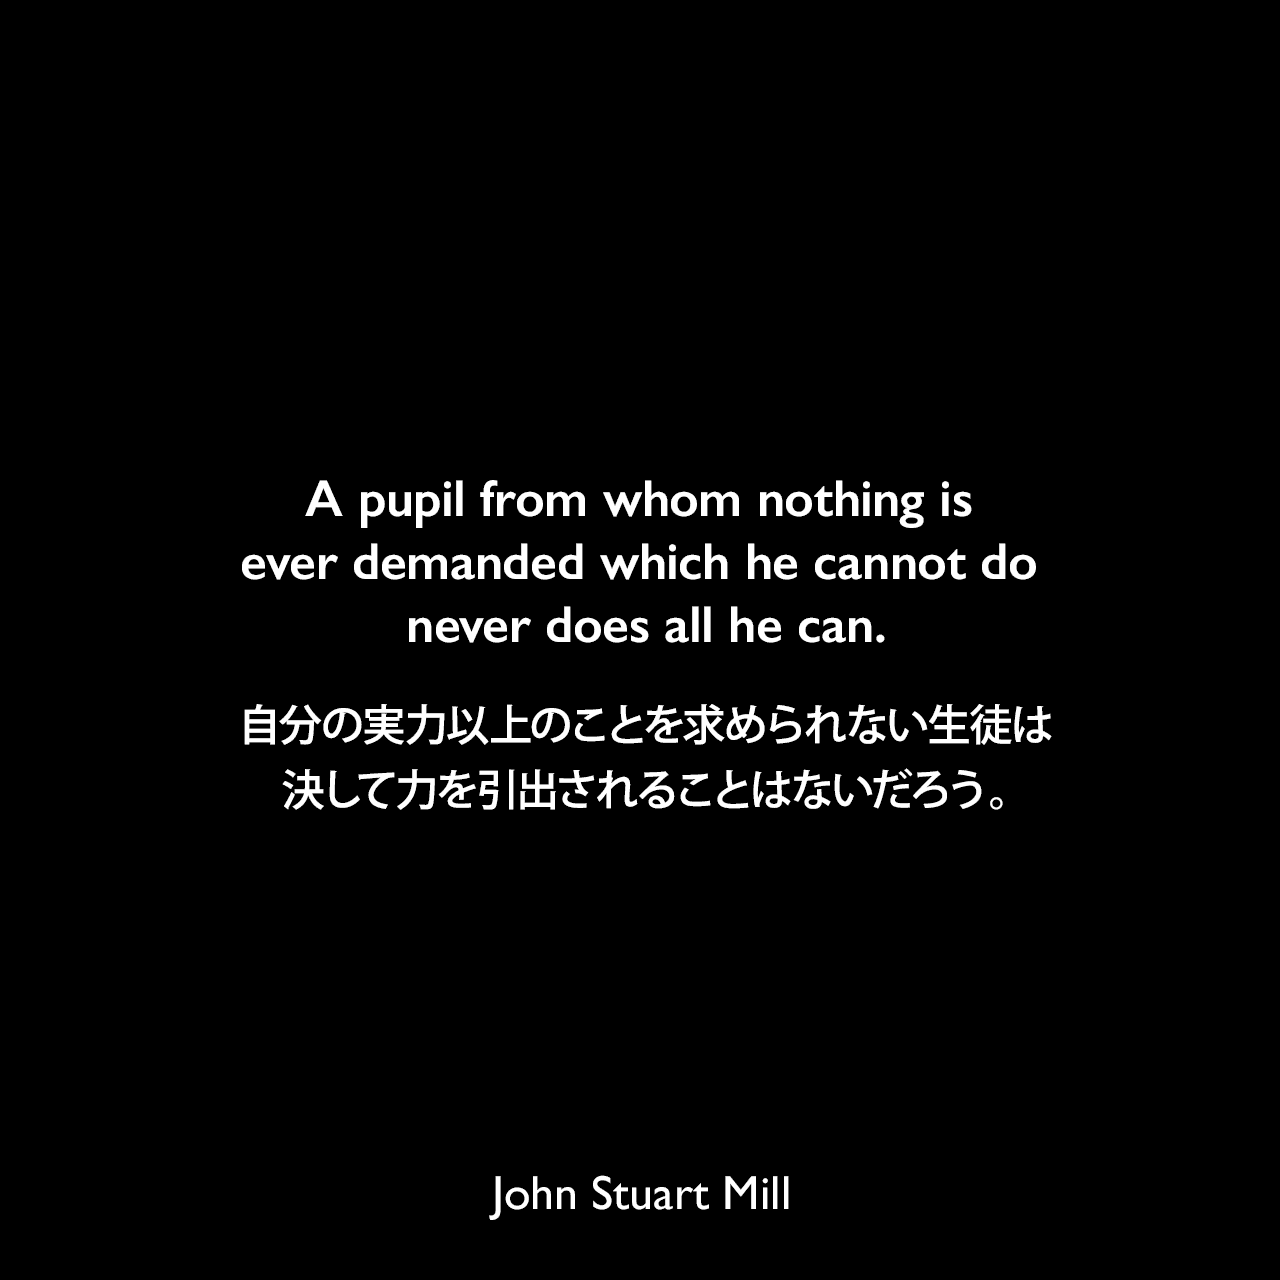 A pupil from whom nothing is ever demanded which he cannot do never does all he can.自分の実力以上のことを求められない生徒は、決して力を引出されることはないだろう。- ジョン・スチュアート・ミルの自伝より